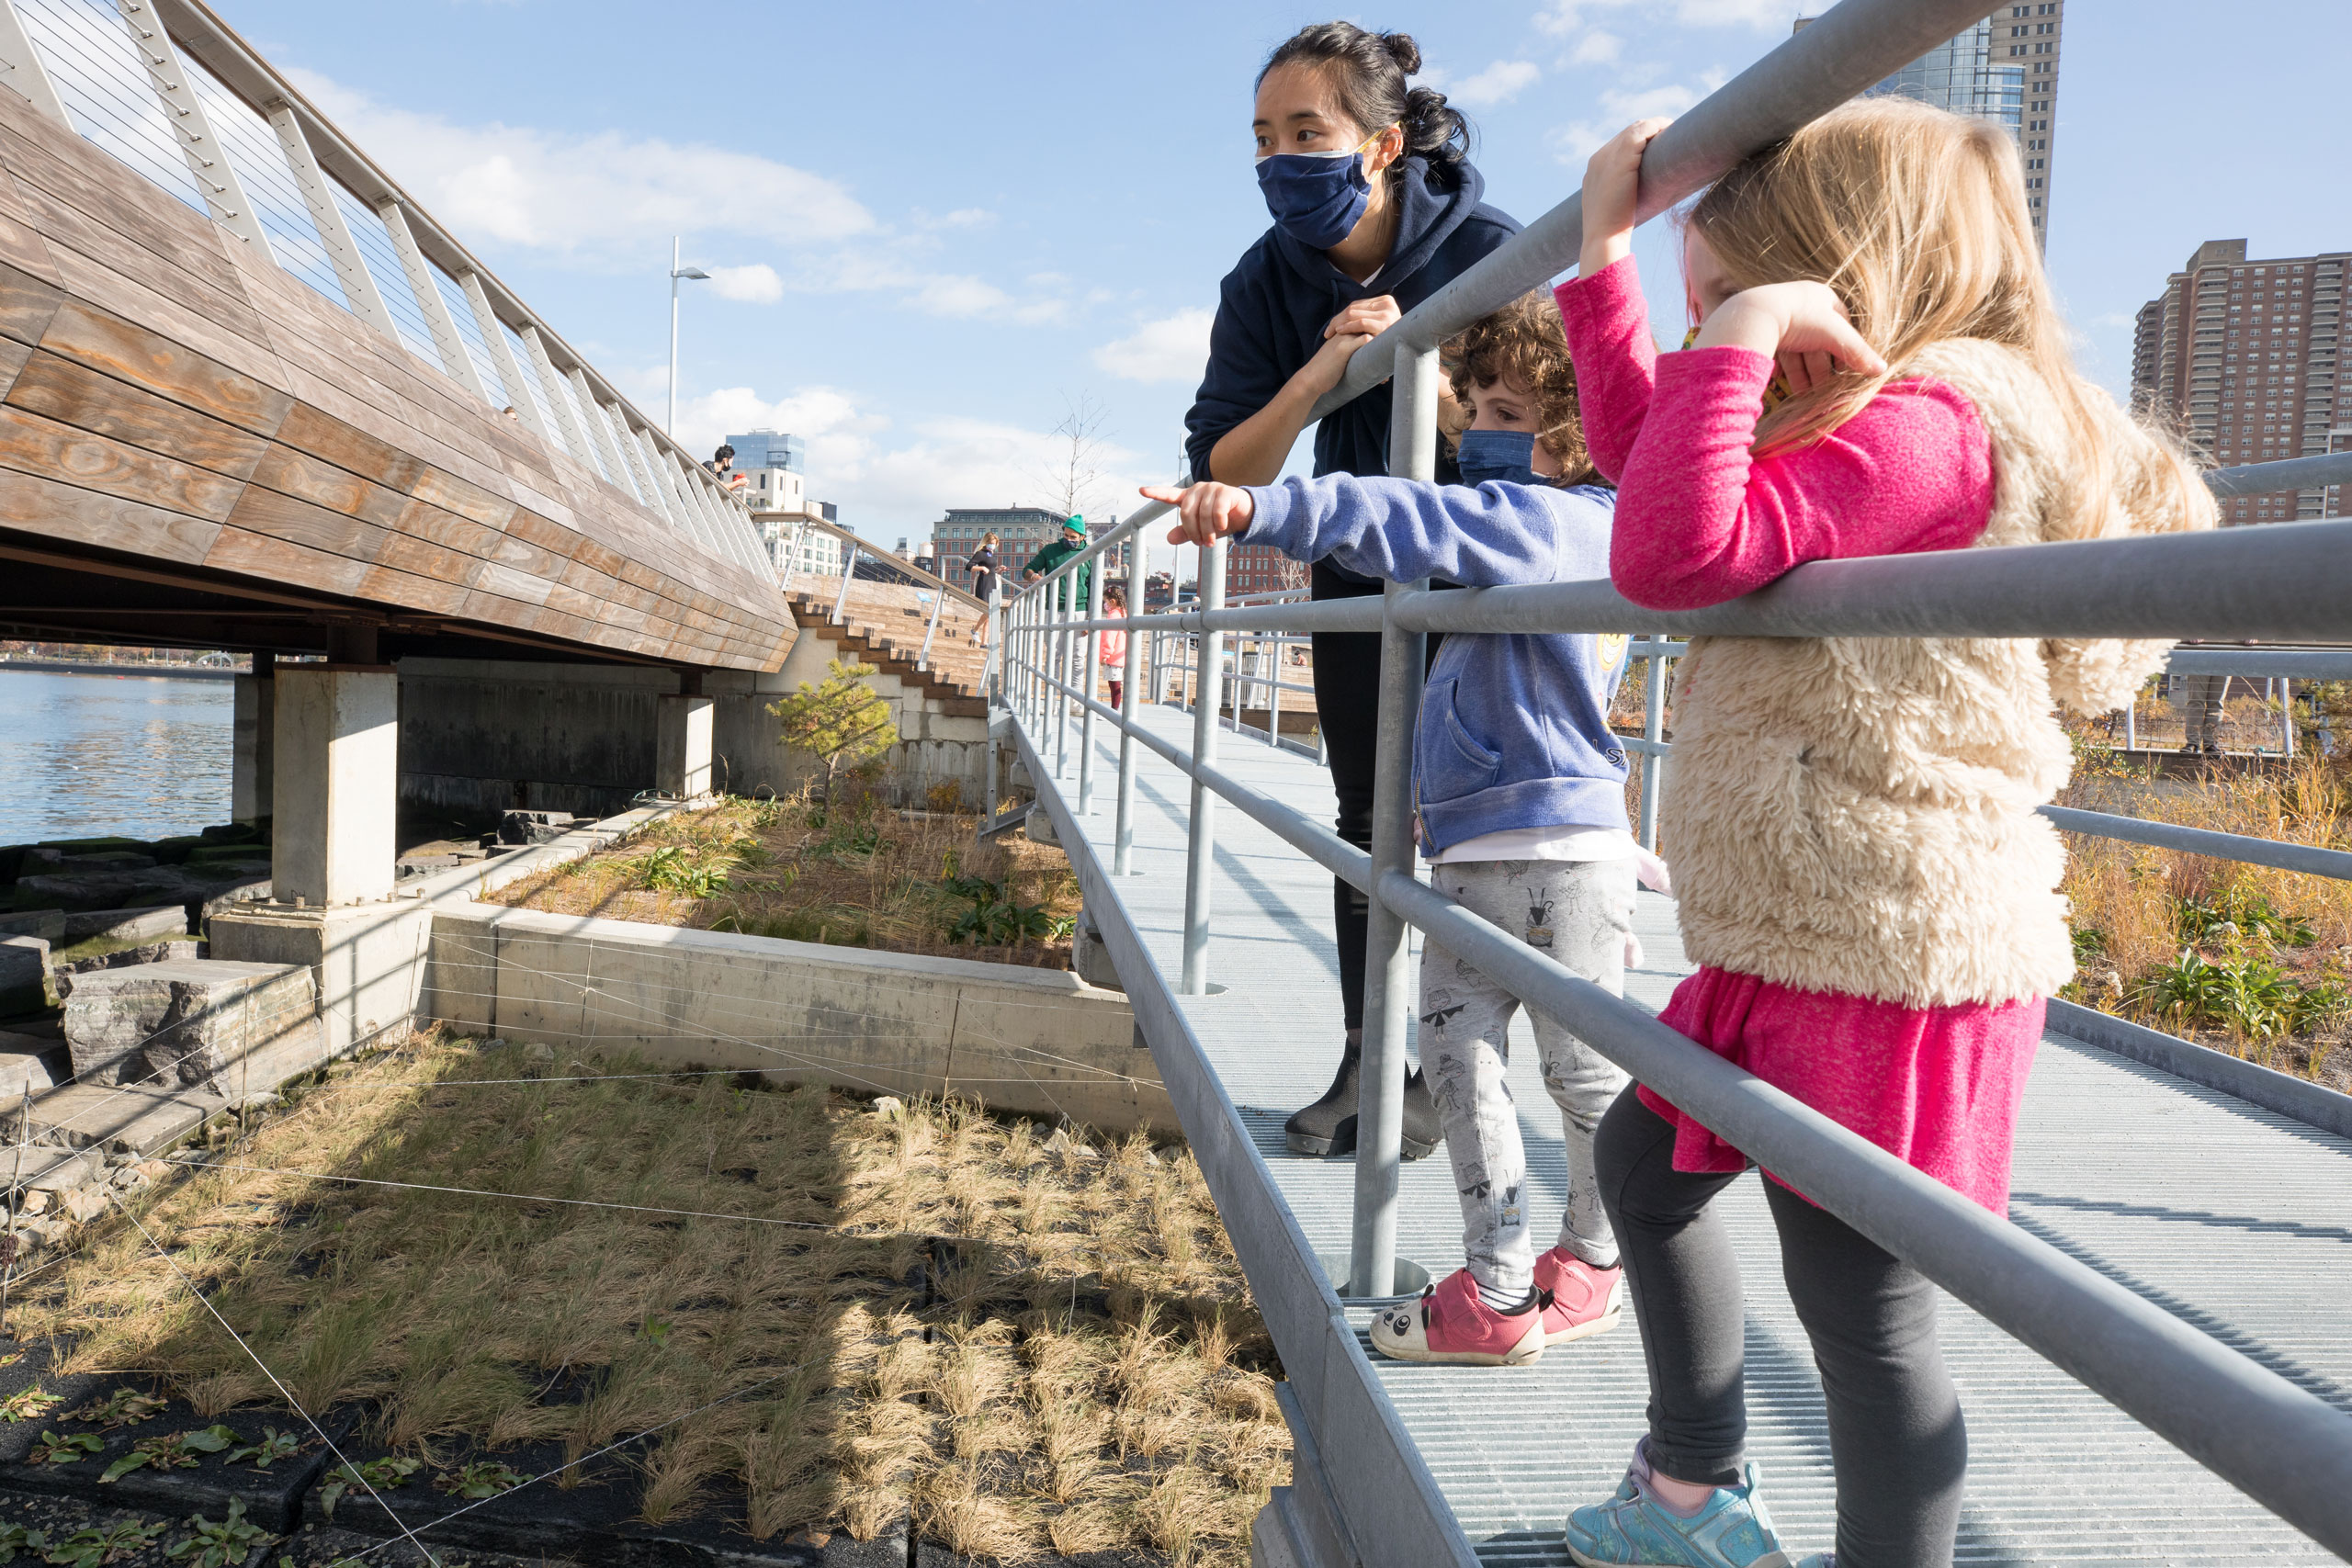 HRPK River Project Park educators point out to young students the native wildlife and ecology of the Hudson River from the Pier 26 Tide Deck